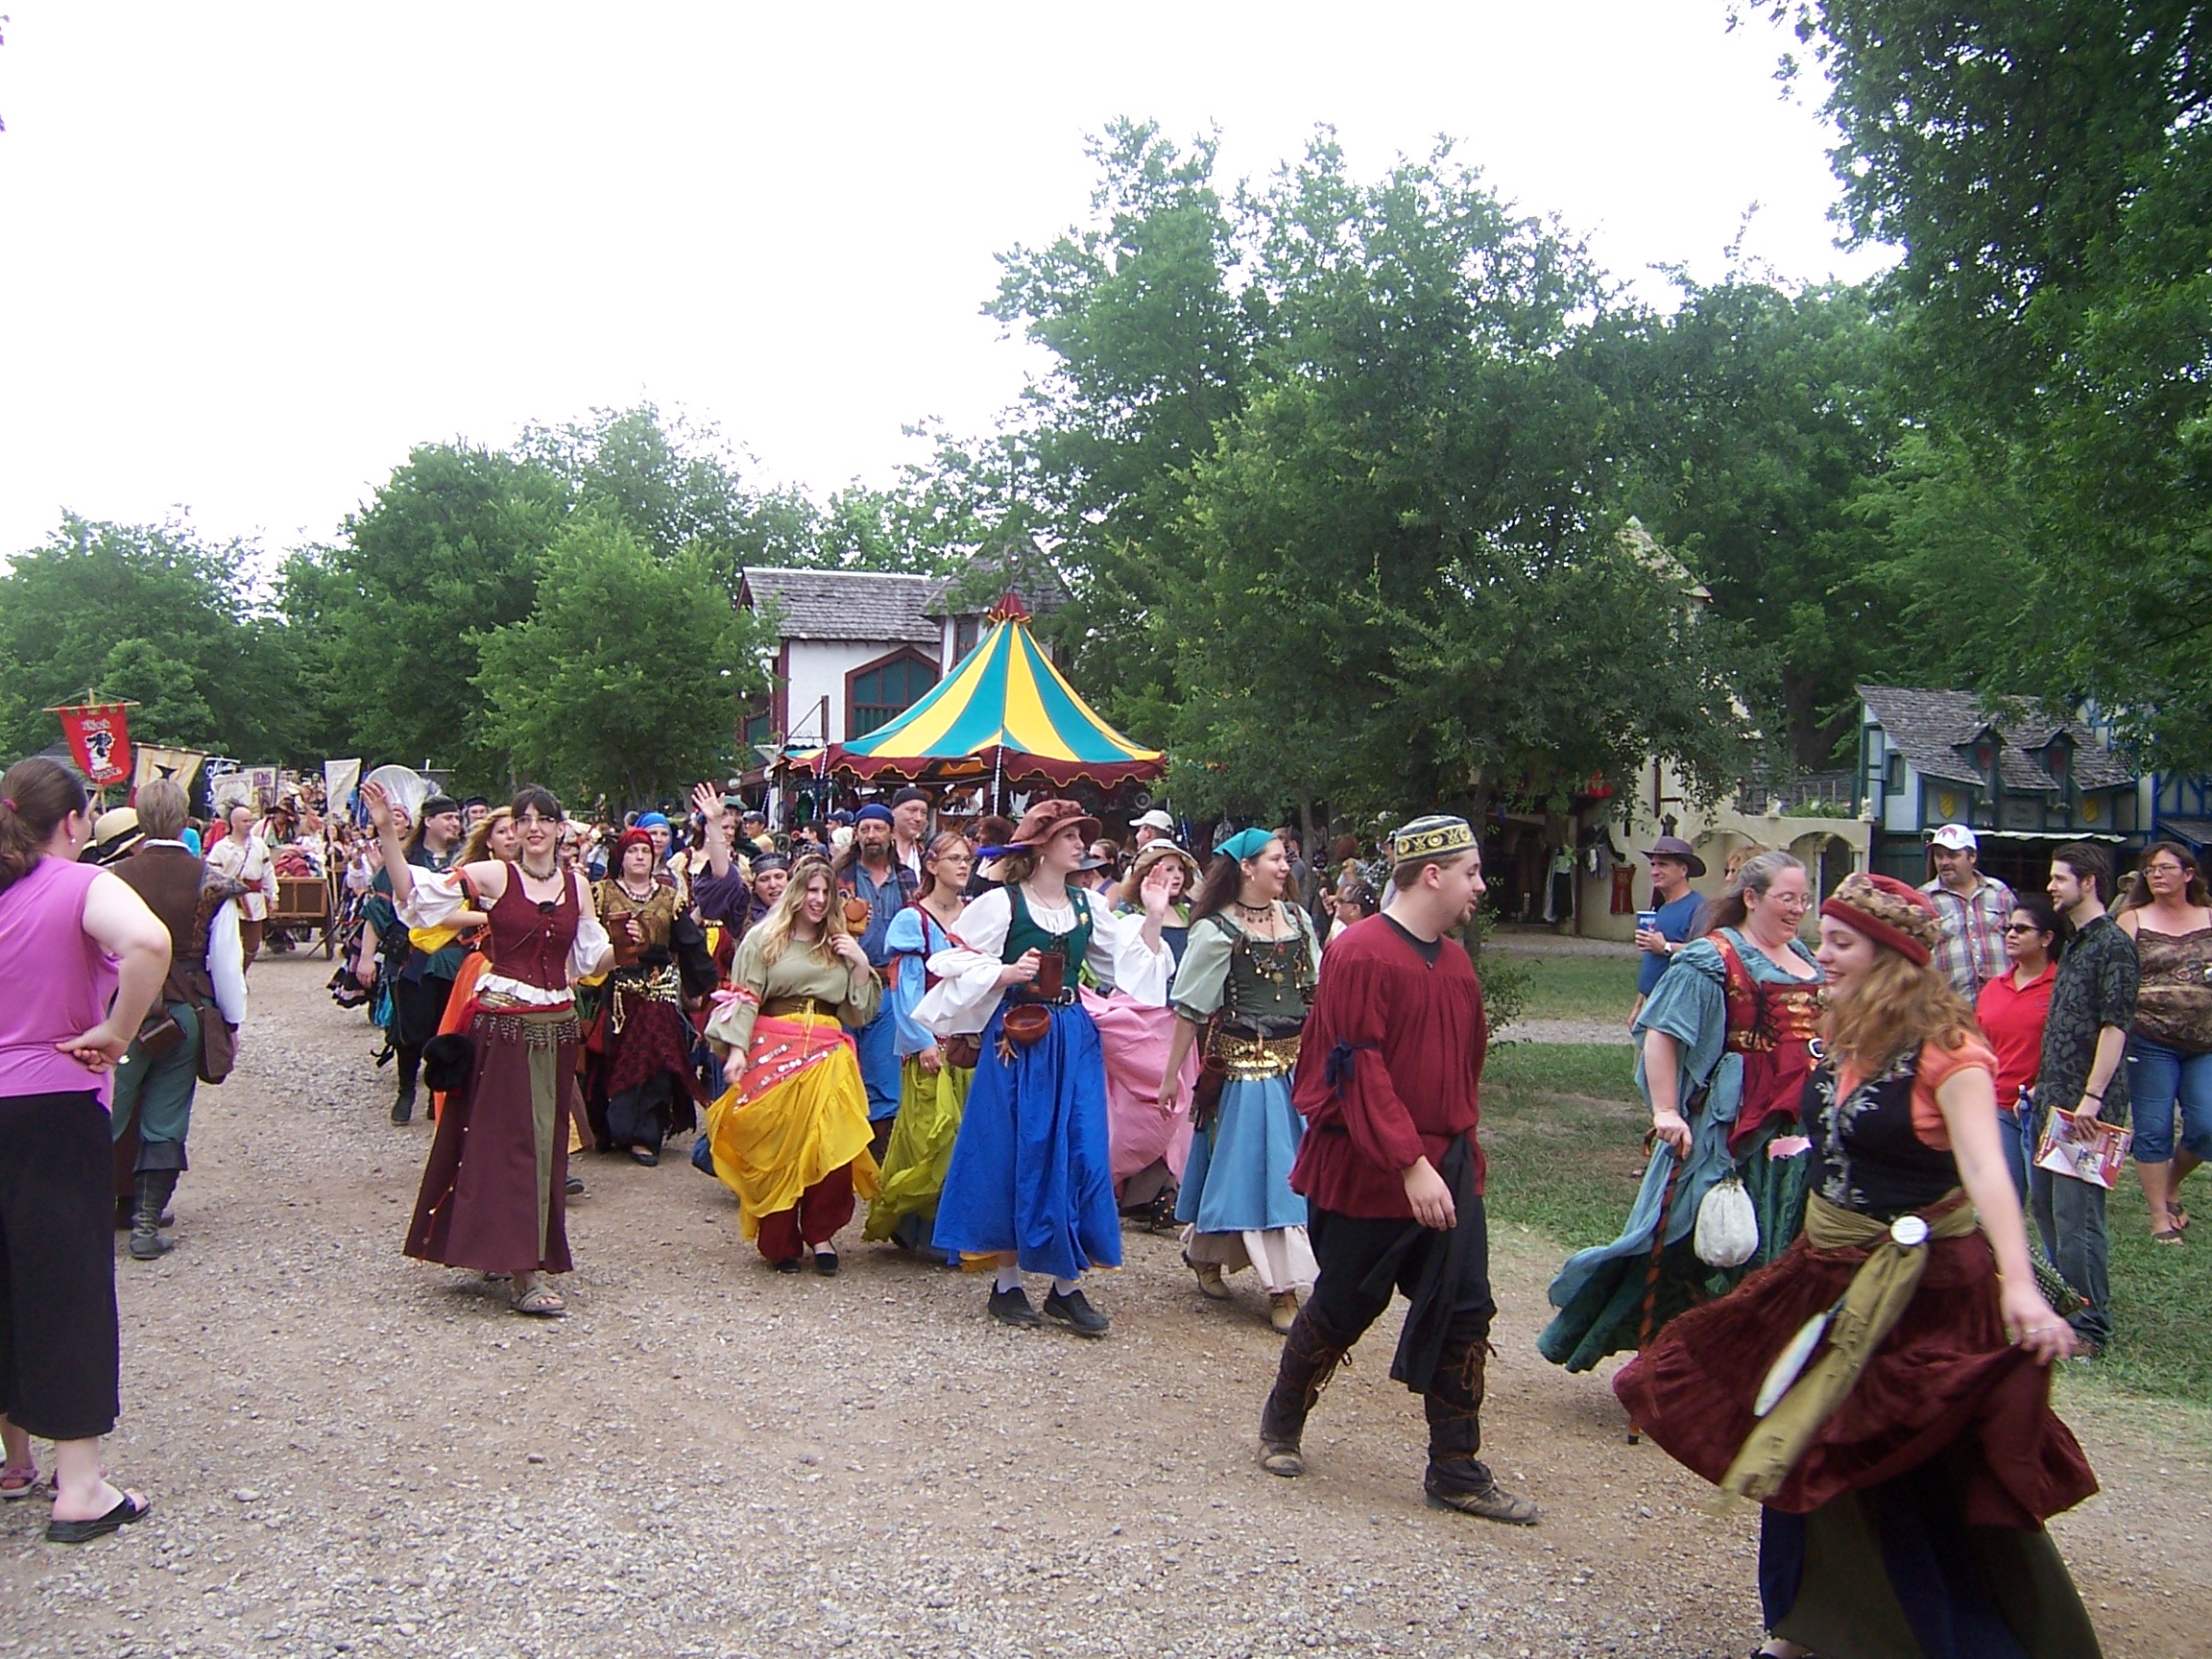 Every day they have a parade at Scarborough Faire. There are several hundred participants including the King and the Queen